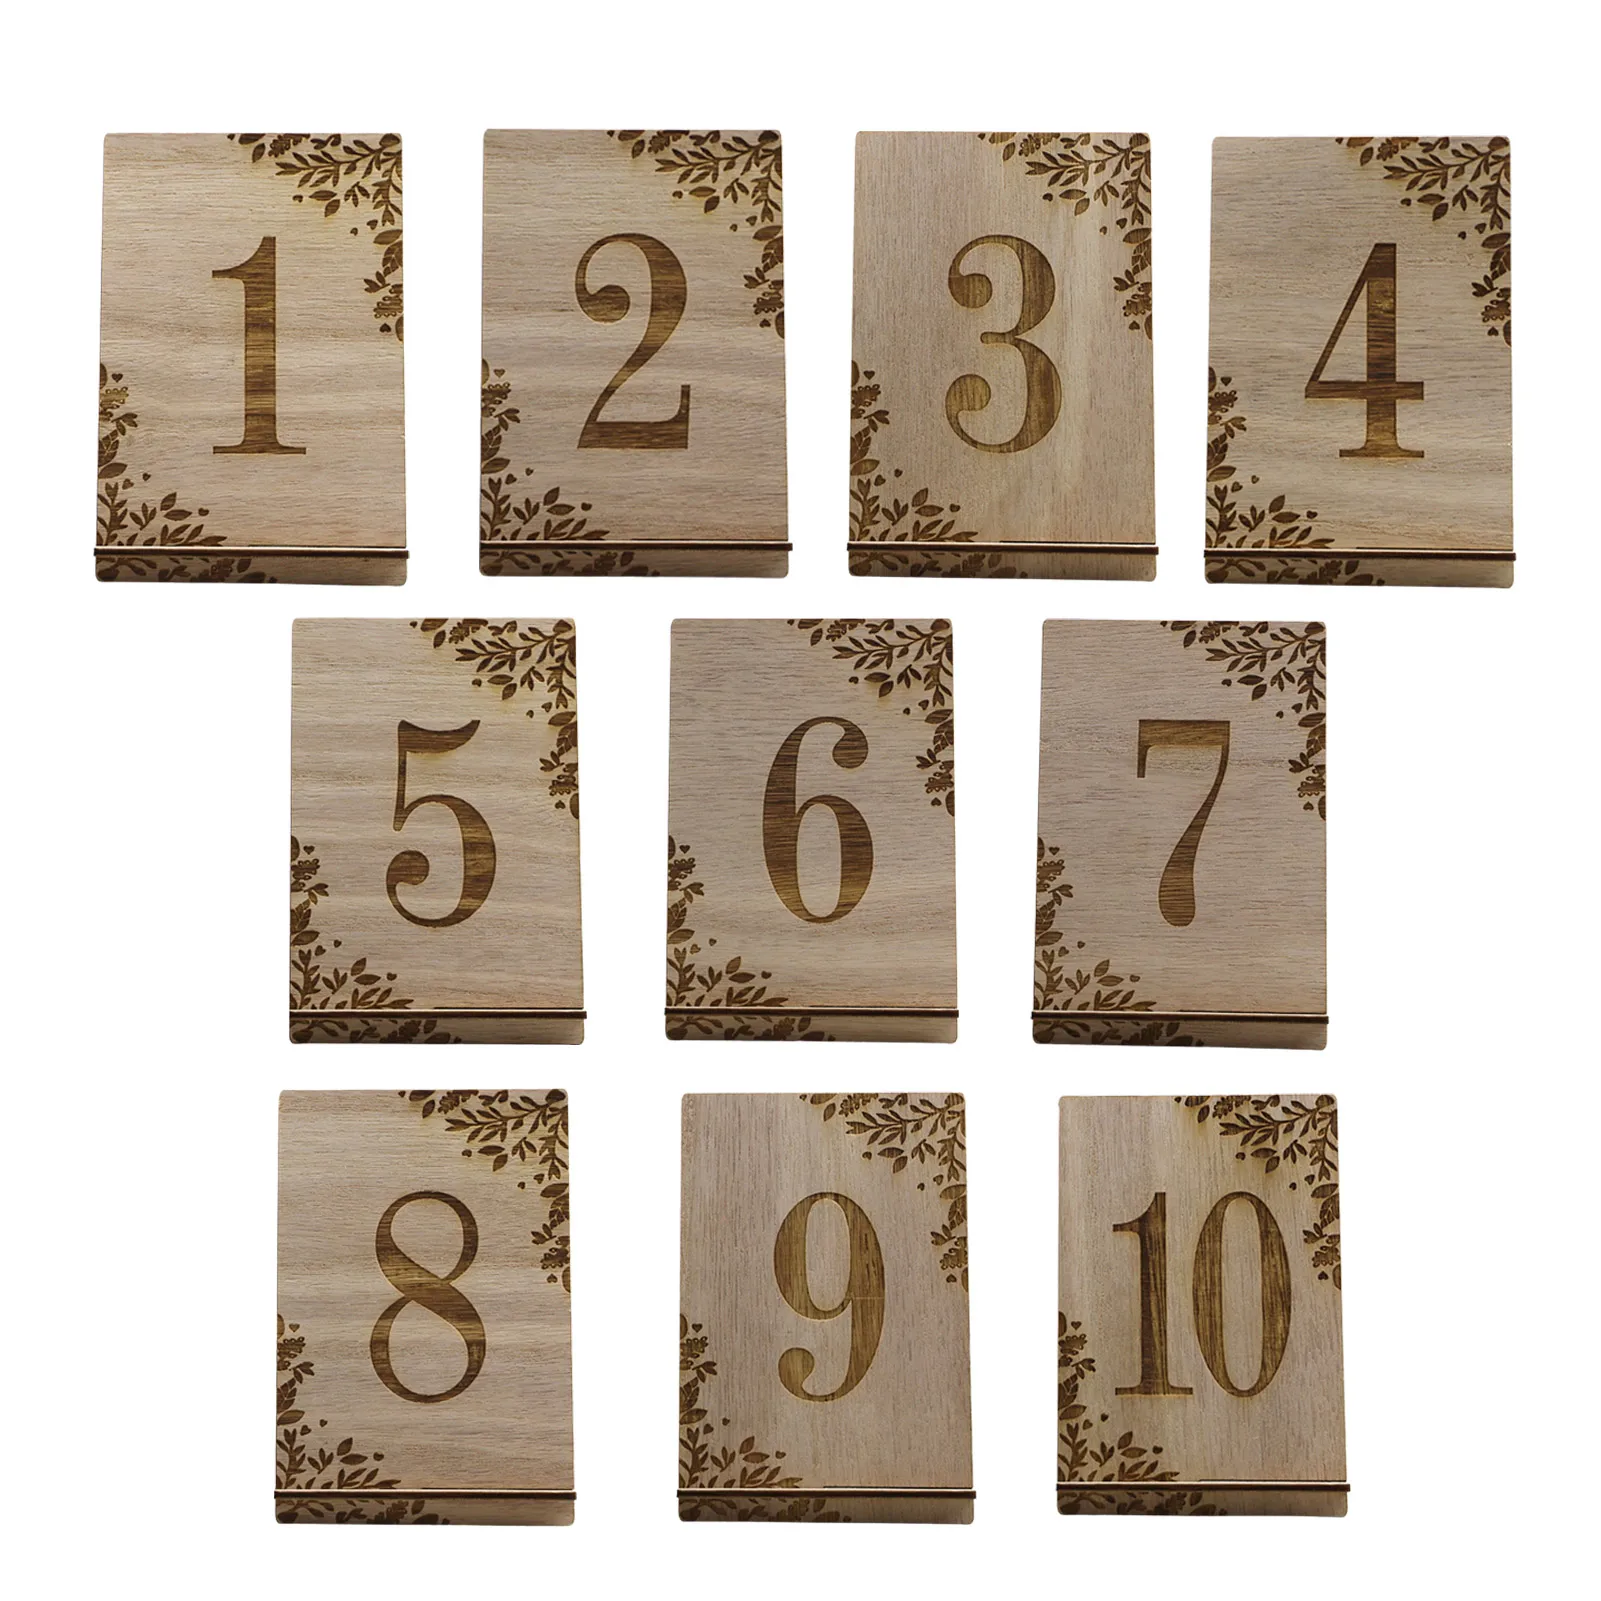 

1-10 Rustic Wooden Table Numbers For Wedding Party Meeting Event Catering Reception Decorative Seat Number Card With Holder Base